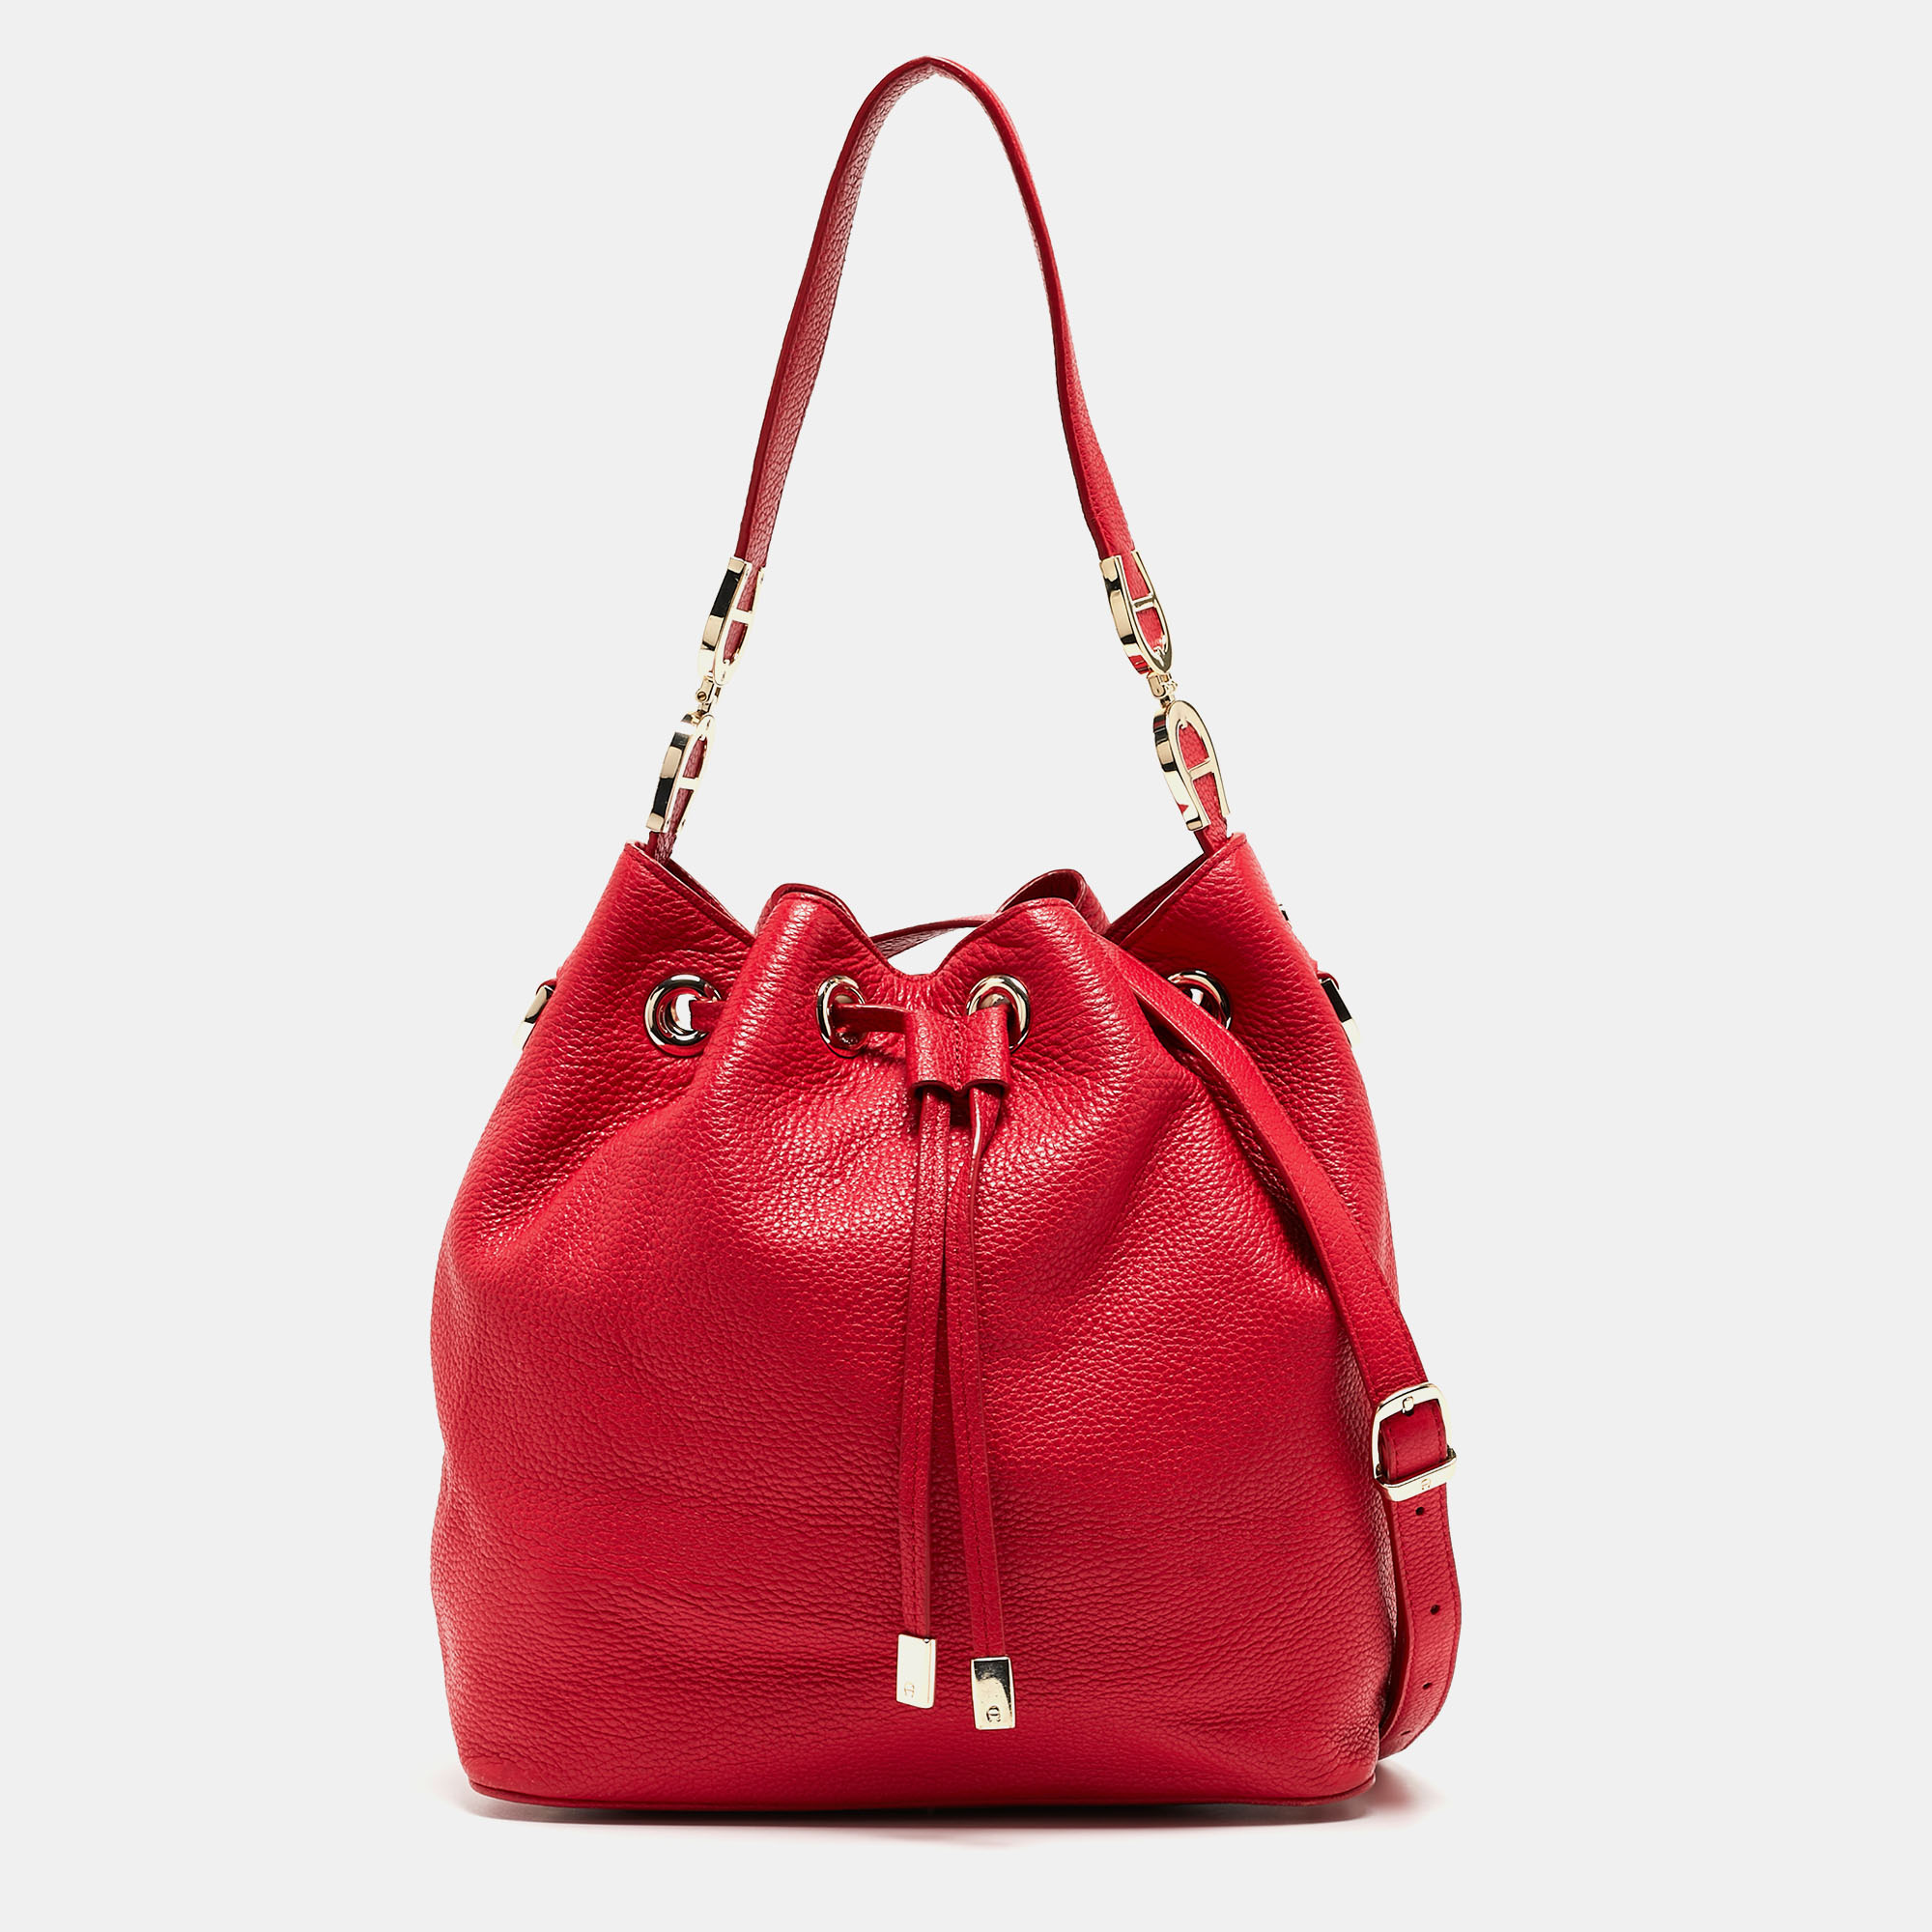 Aigner Red Leather Drawstring Tote